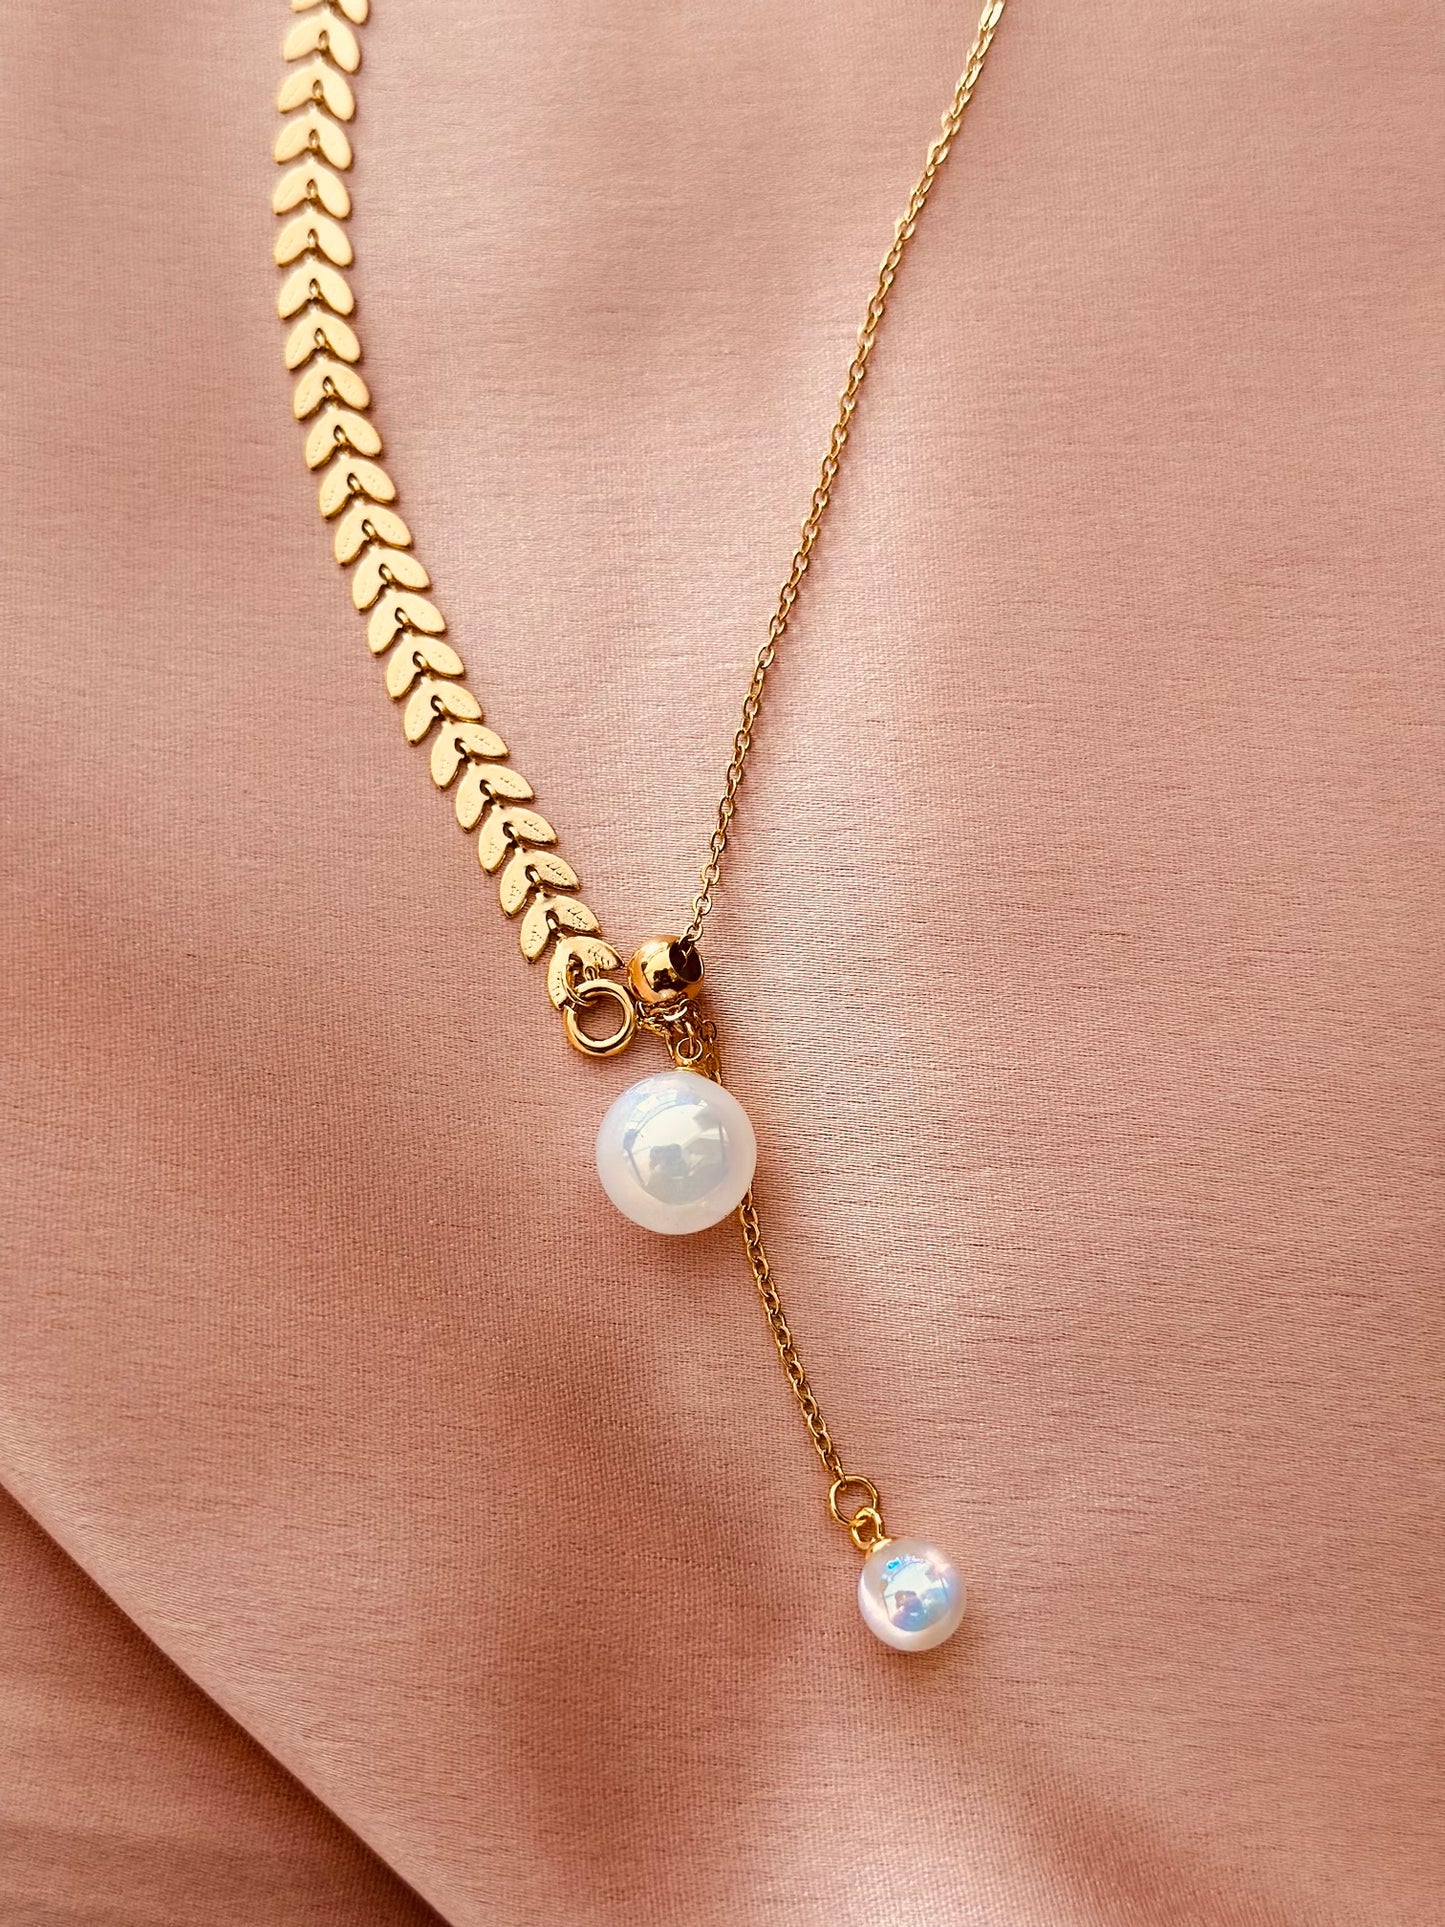 Pearly drops necklace